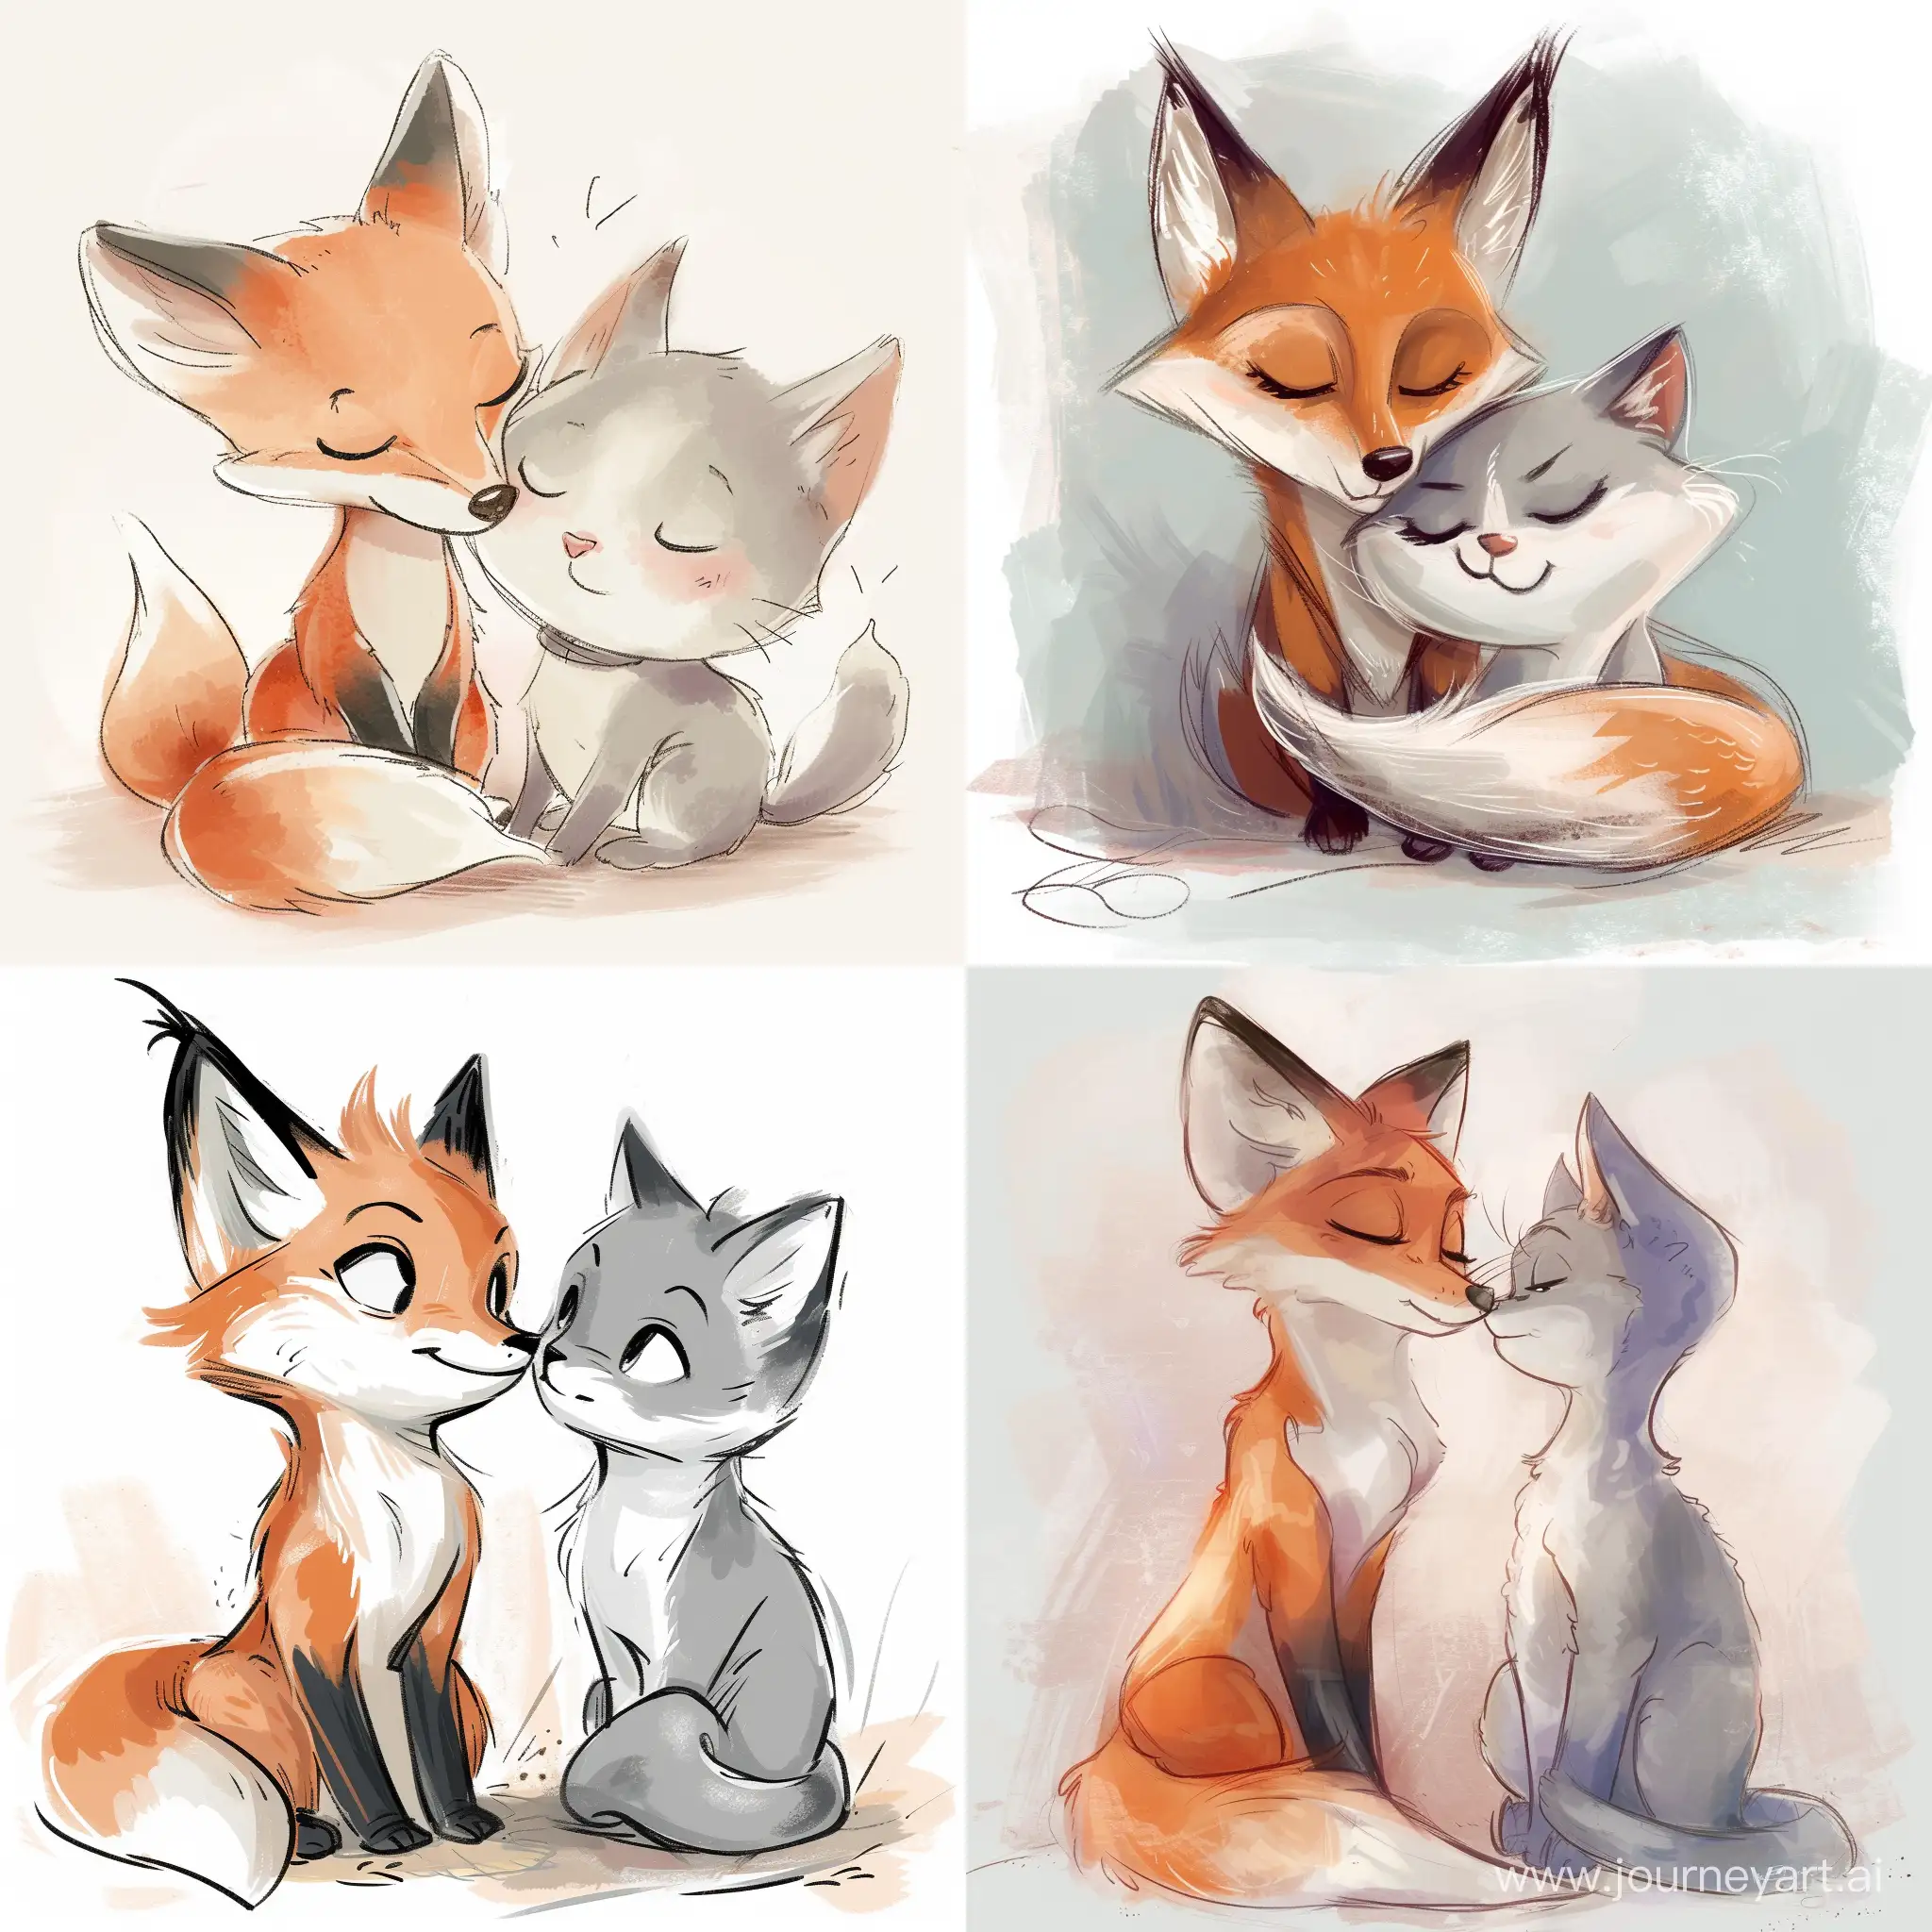 Cute drawing with a fox and a white-gray cat. Fox should be a girl and the cat should be a boy.